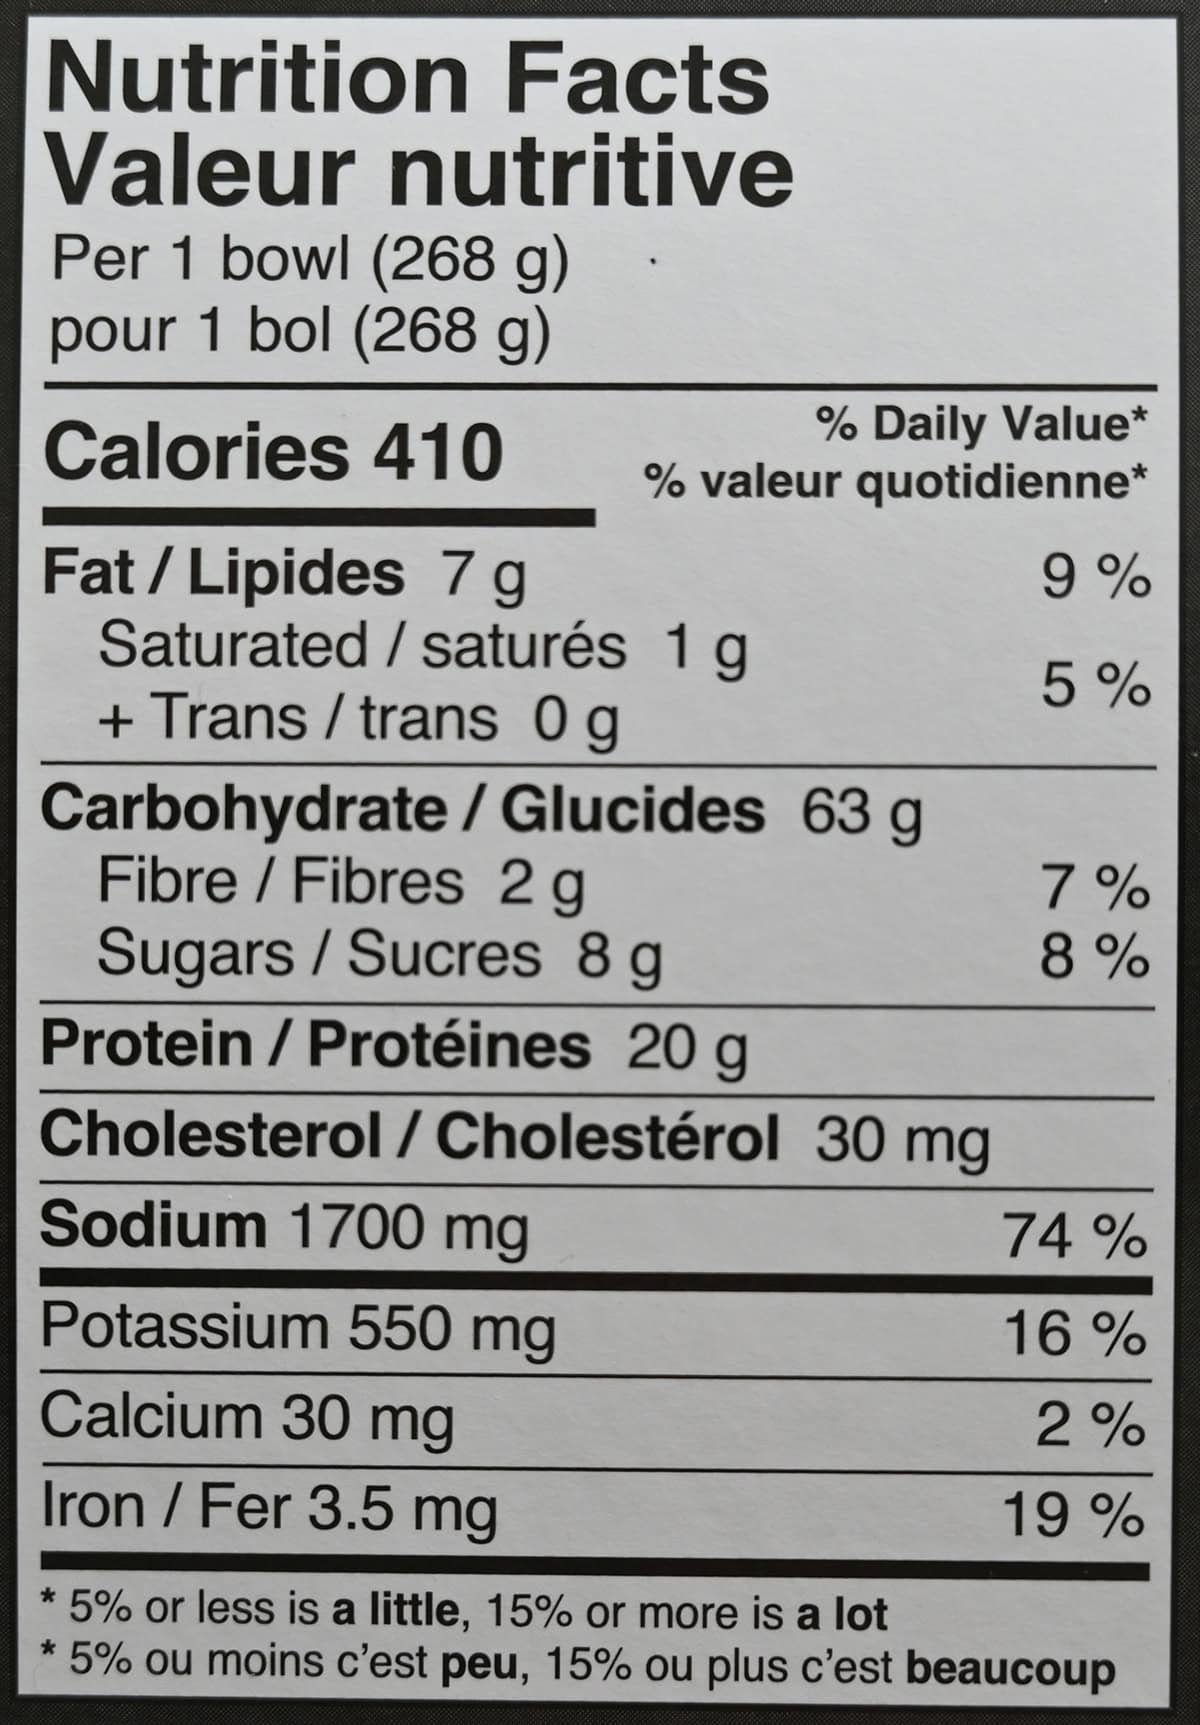 Image of the nutrition facts for the ramen from the back of the box.